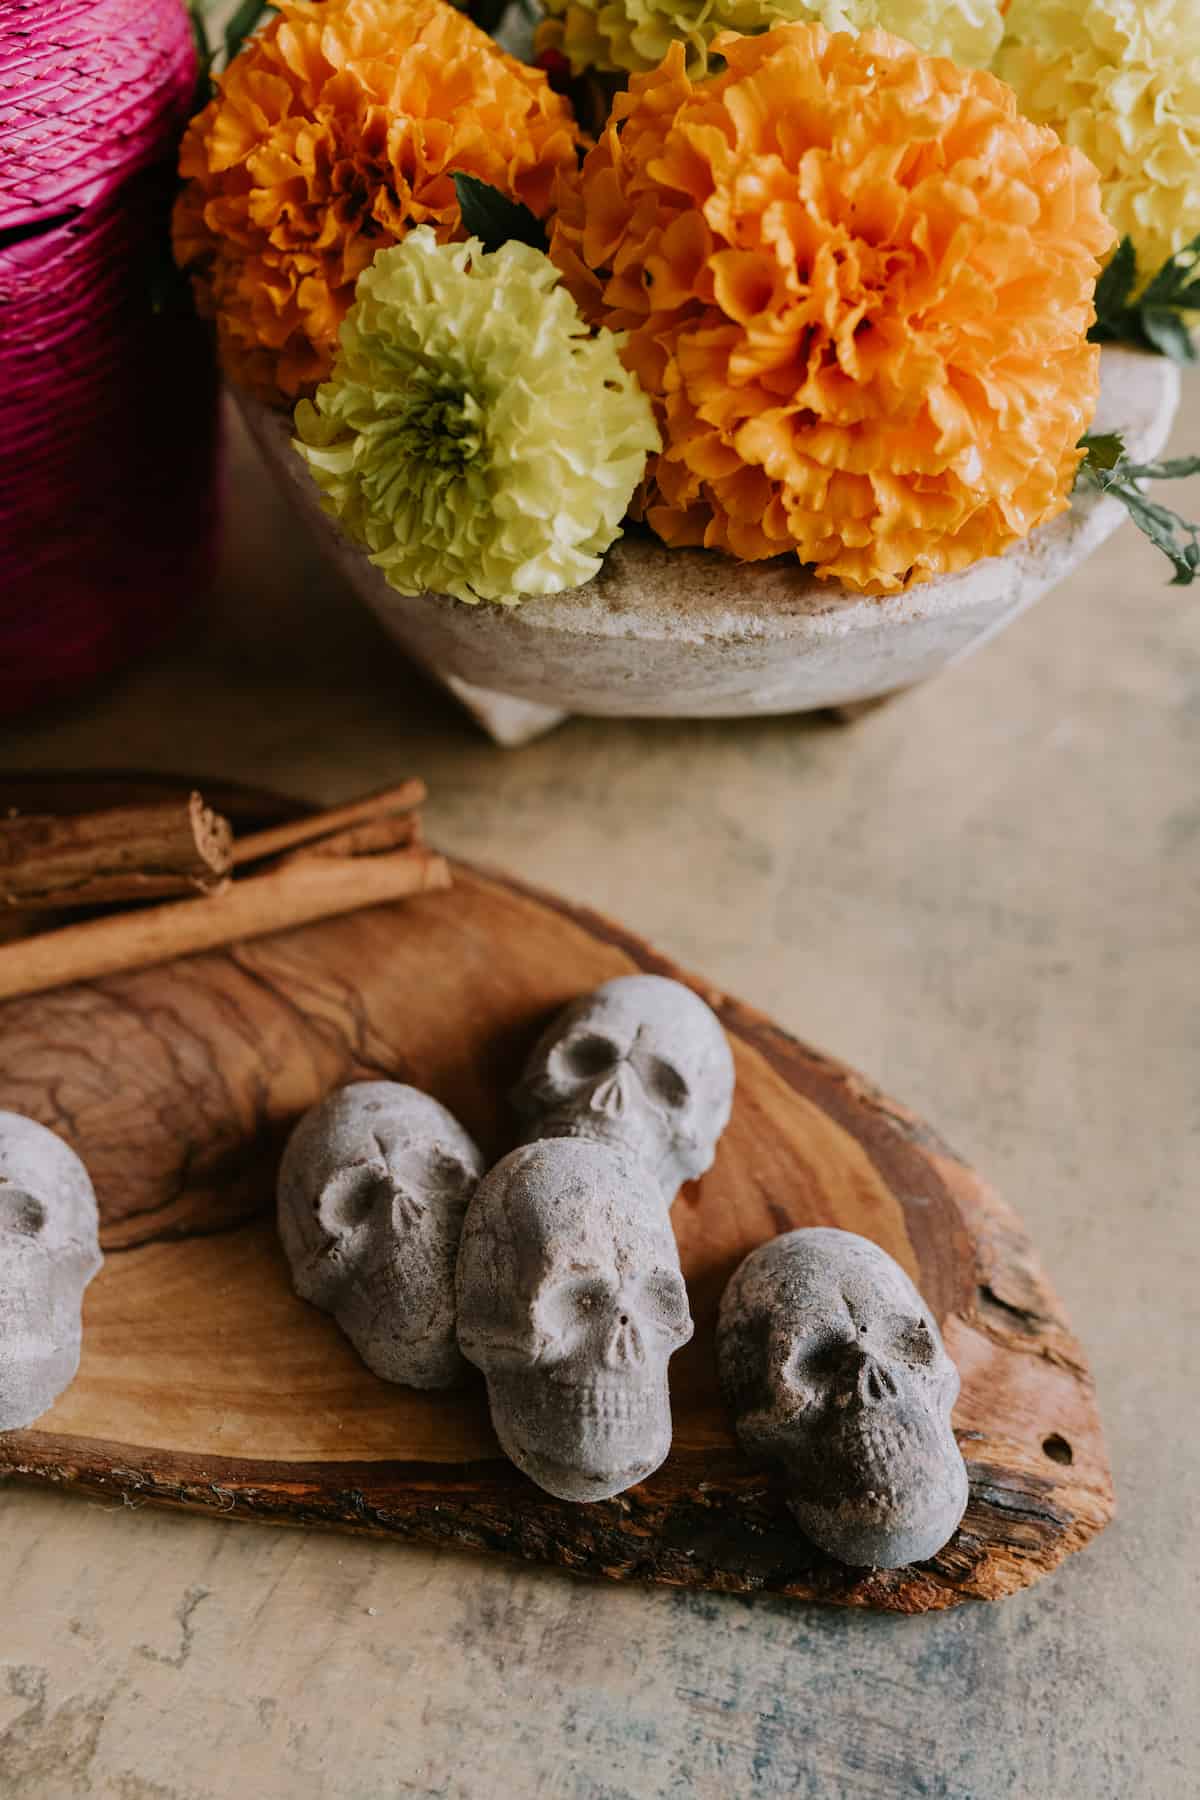 artisan mexican chocolate skulls for dia de los muertos with marigolds on the side